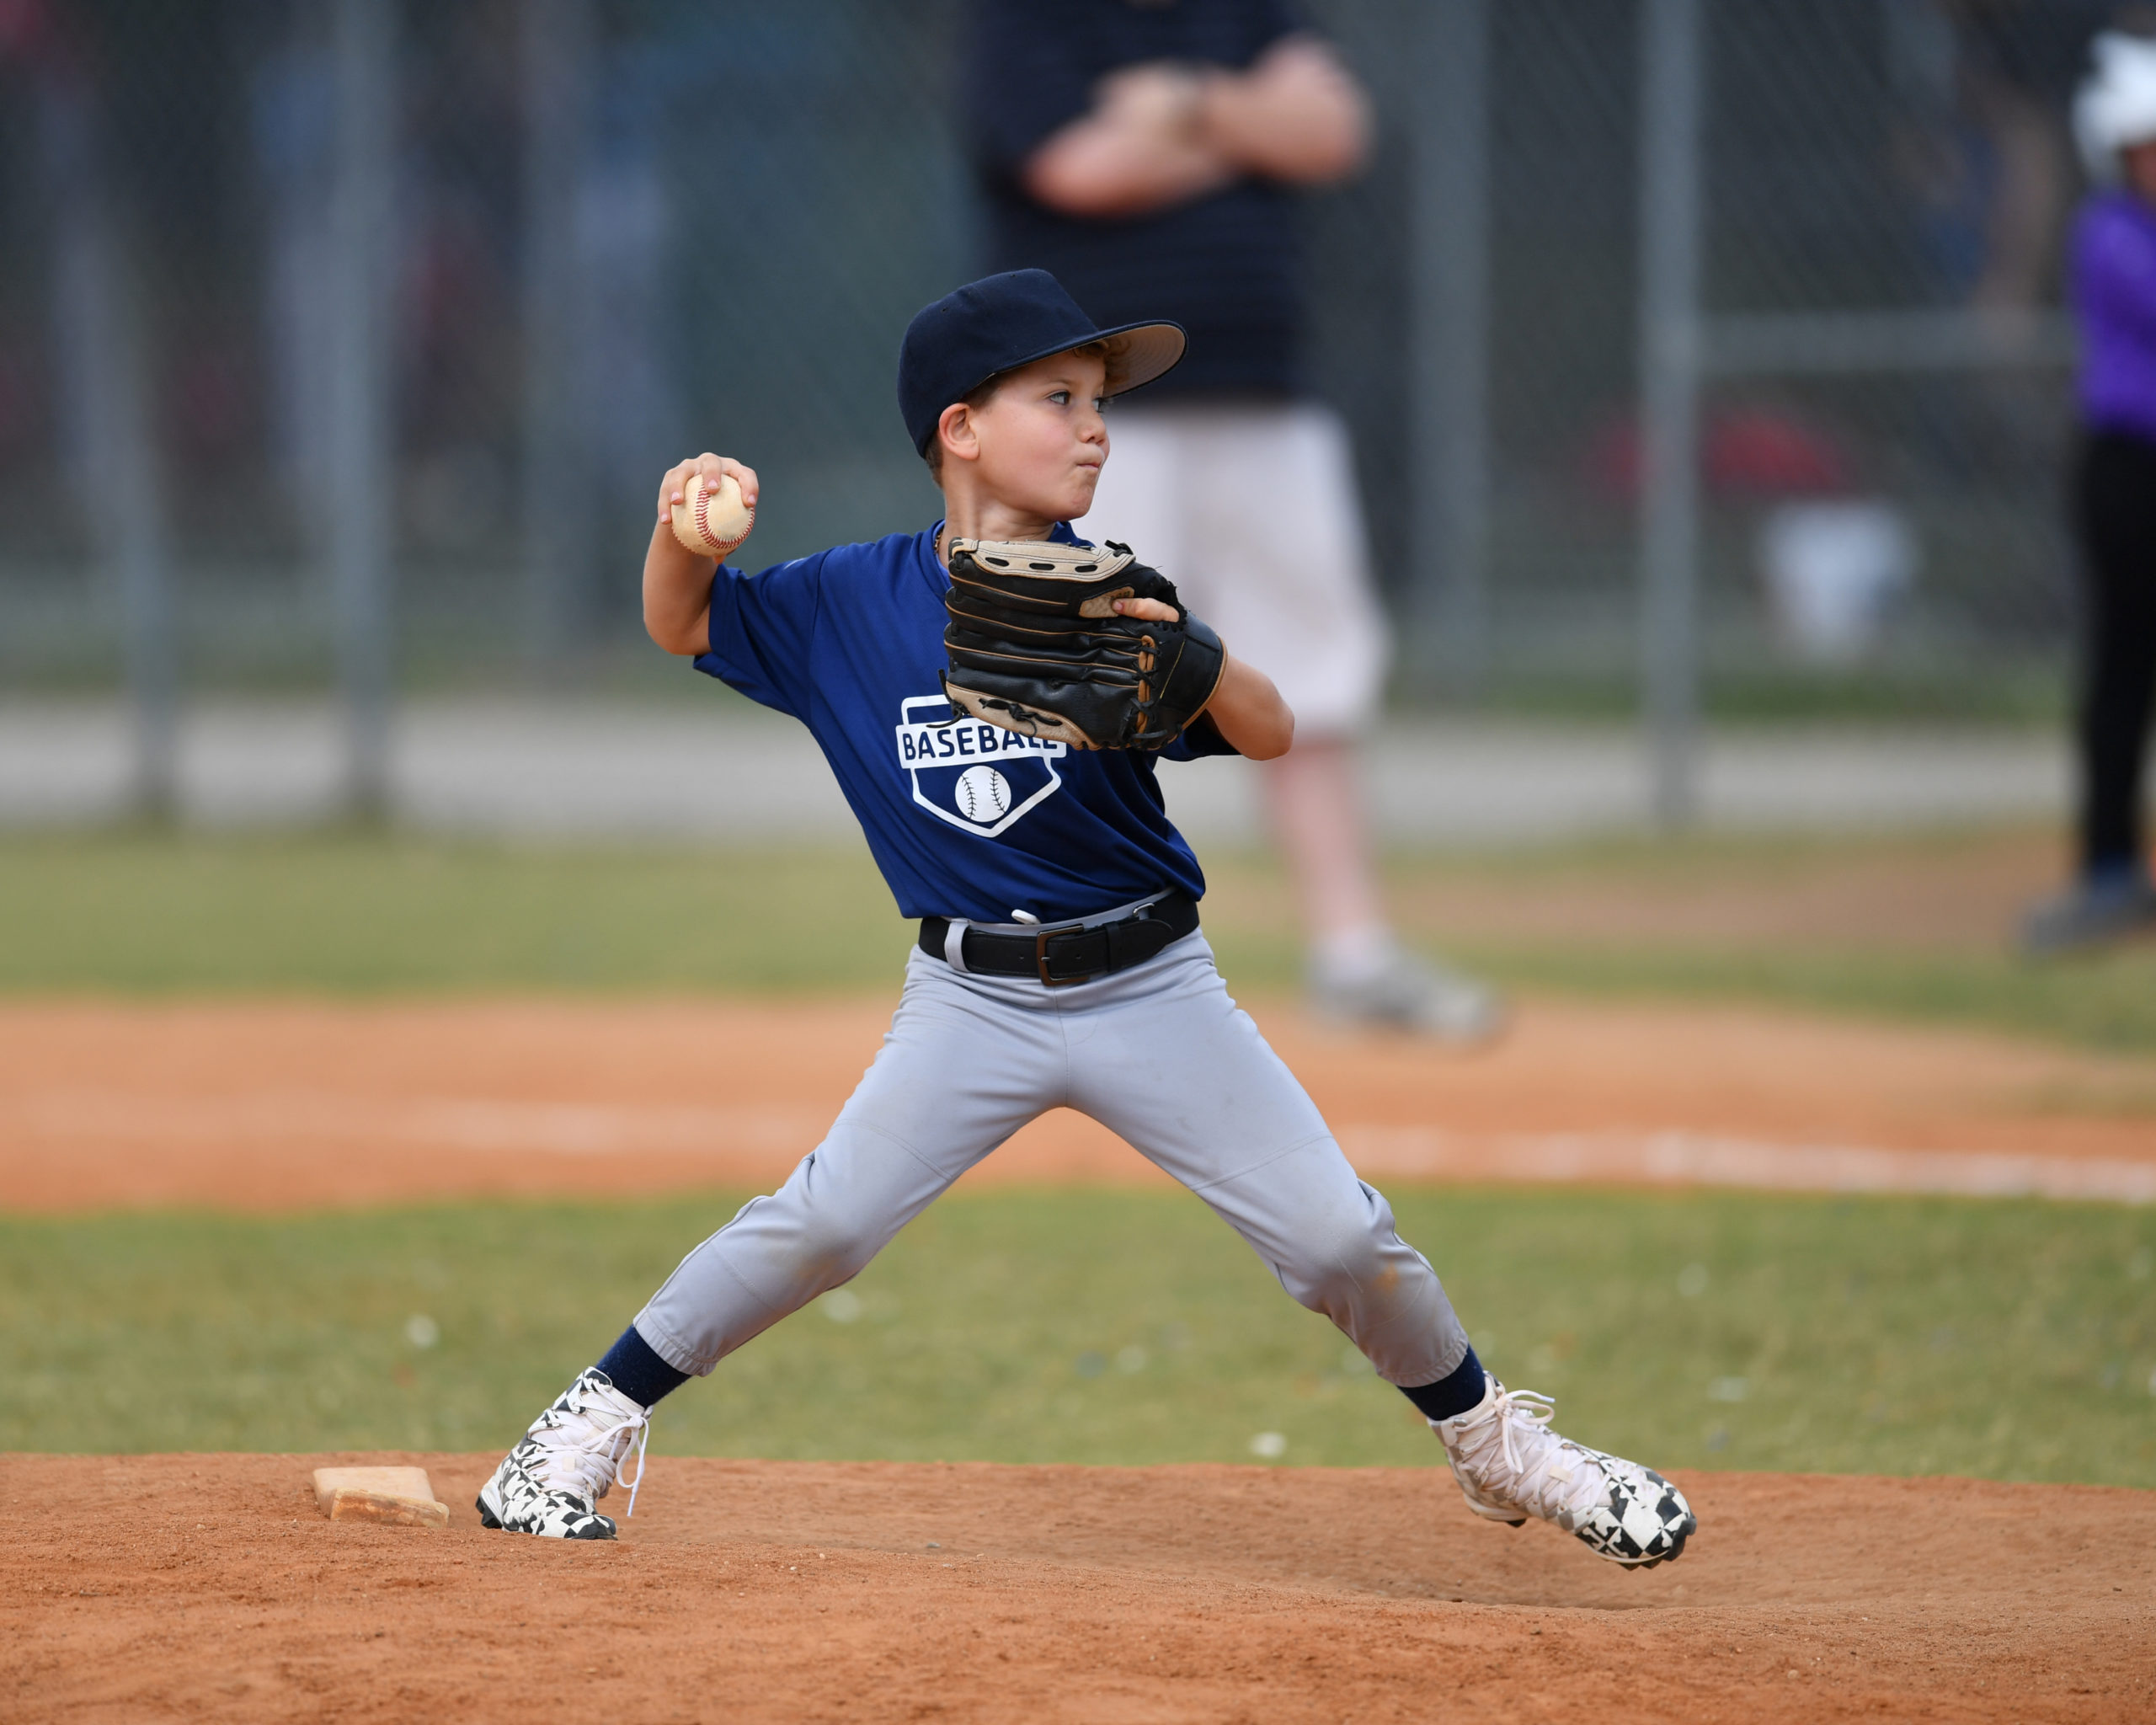 Young baseball pitcher in wind up about to through the ball